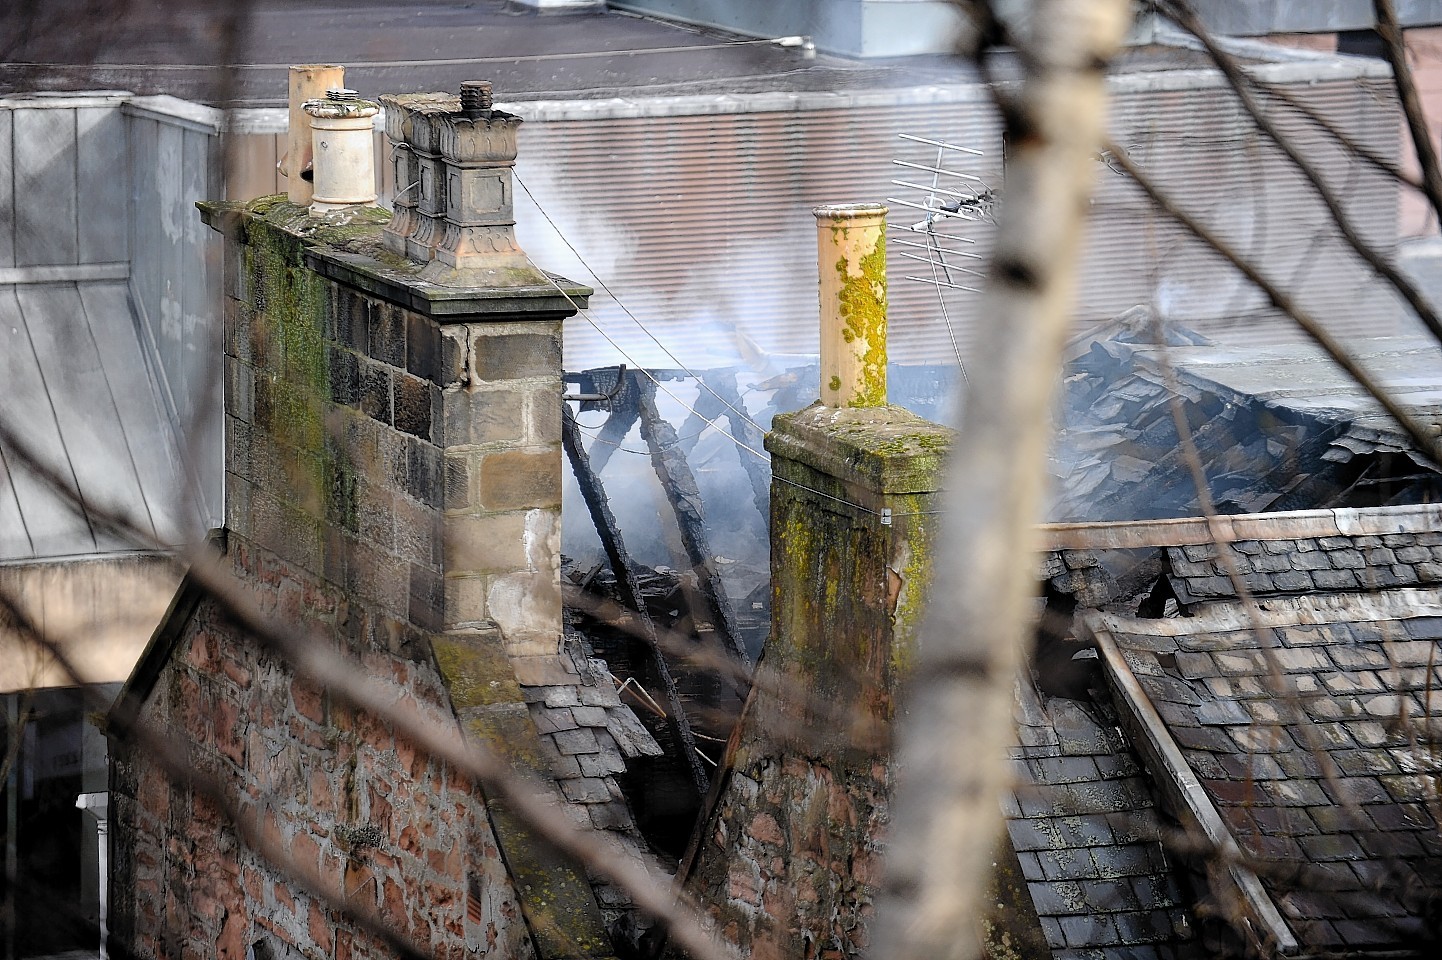 The Eastgate Hostel went on fire in April 2013 and is now set for demolition next month